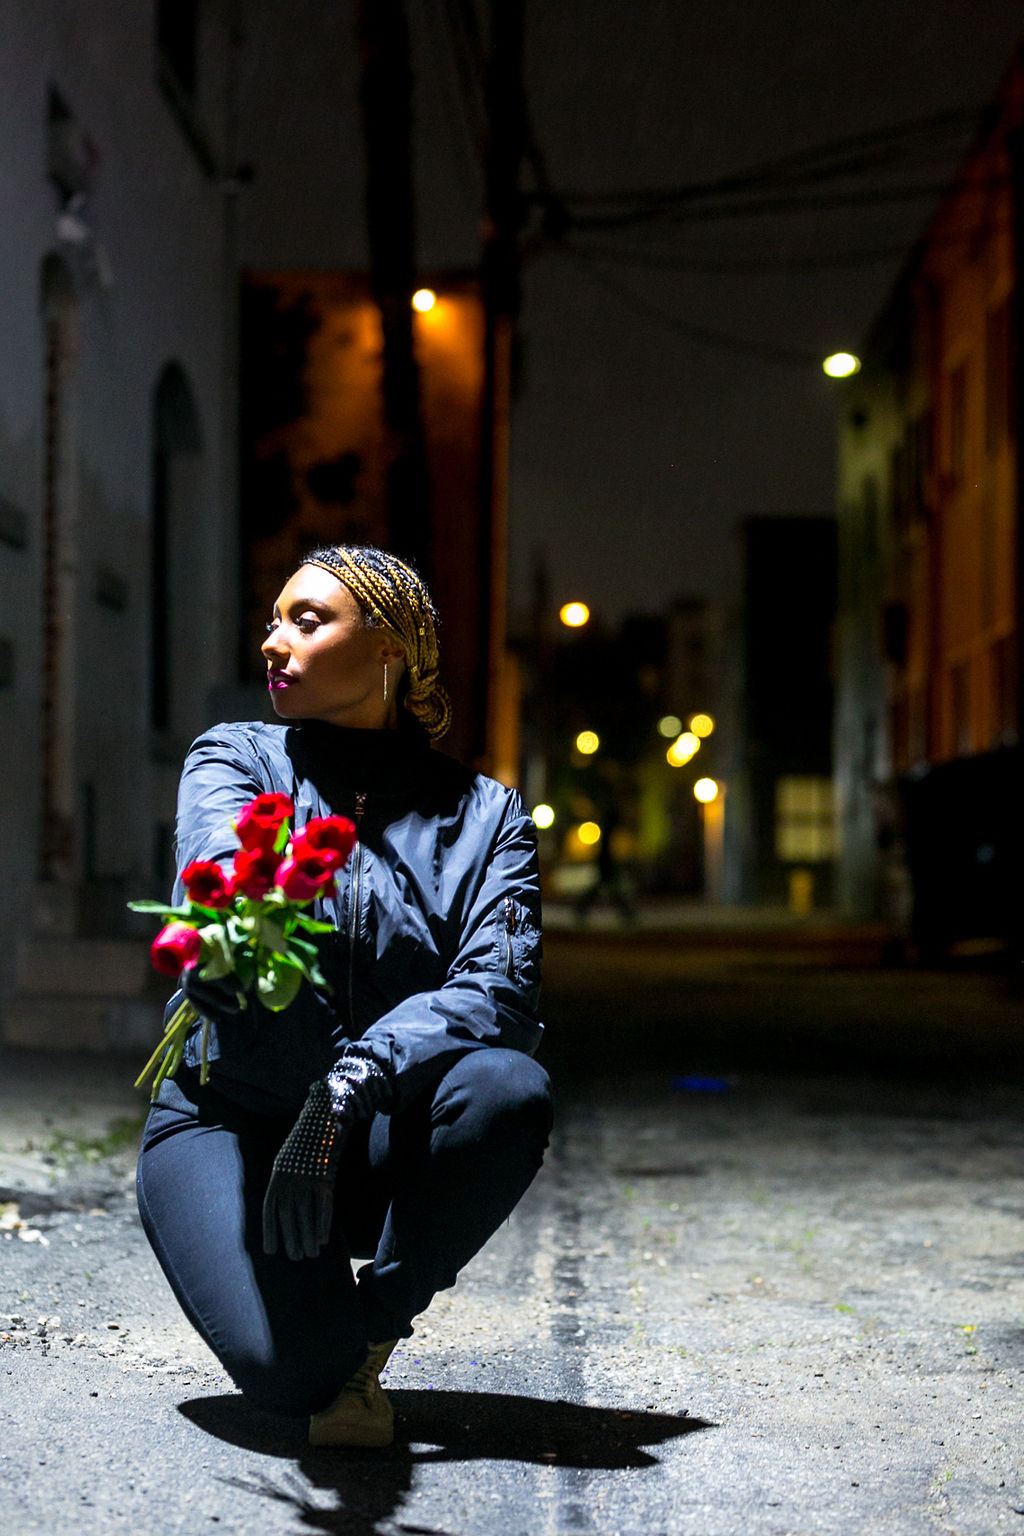 roses-night photography-lcm-rsee-wear who you are-xmmtt